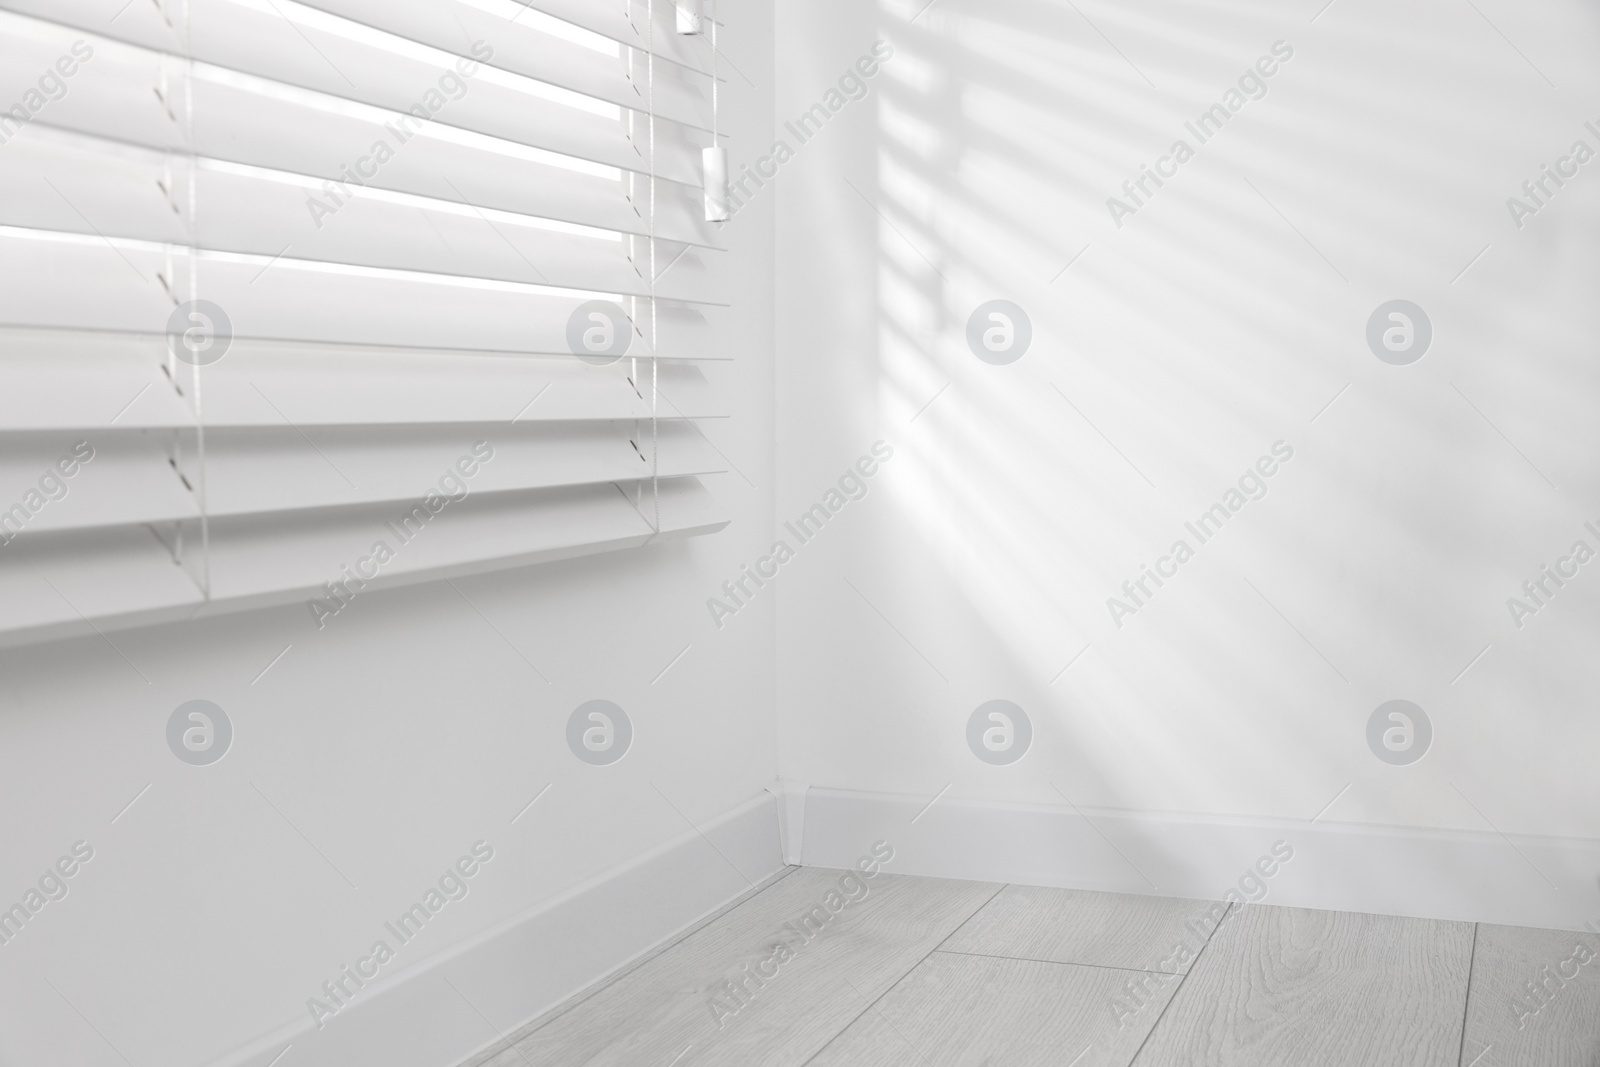 Photo of Window with closed horizontal blinds near white wall indoors